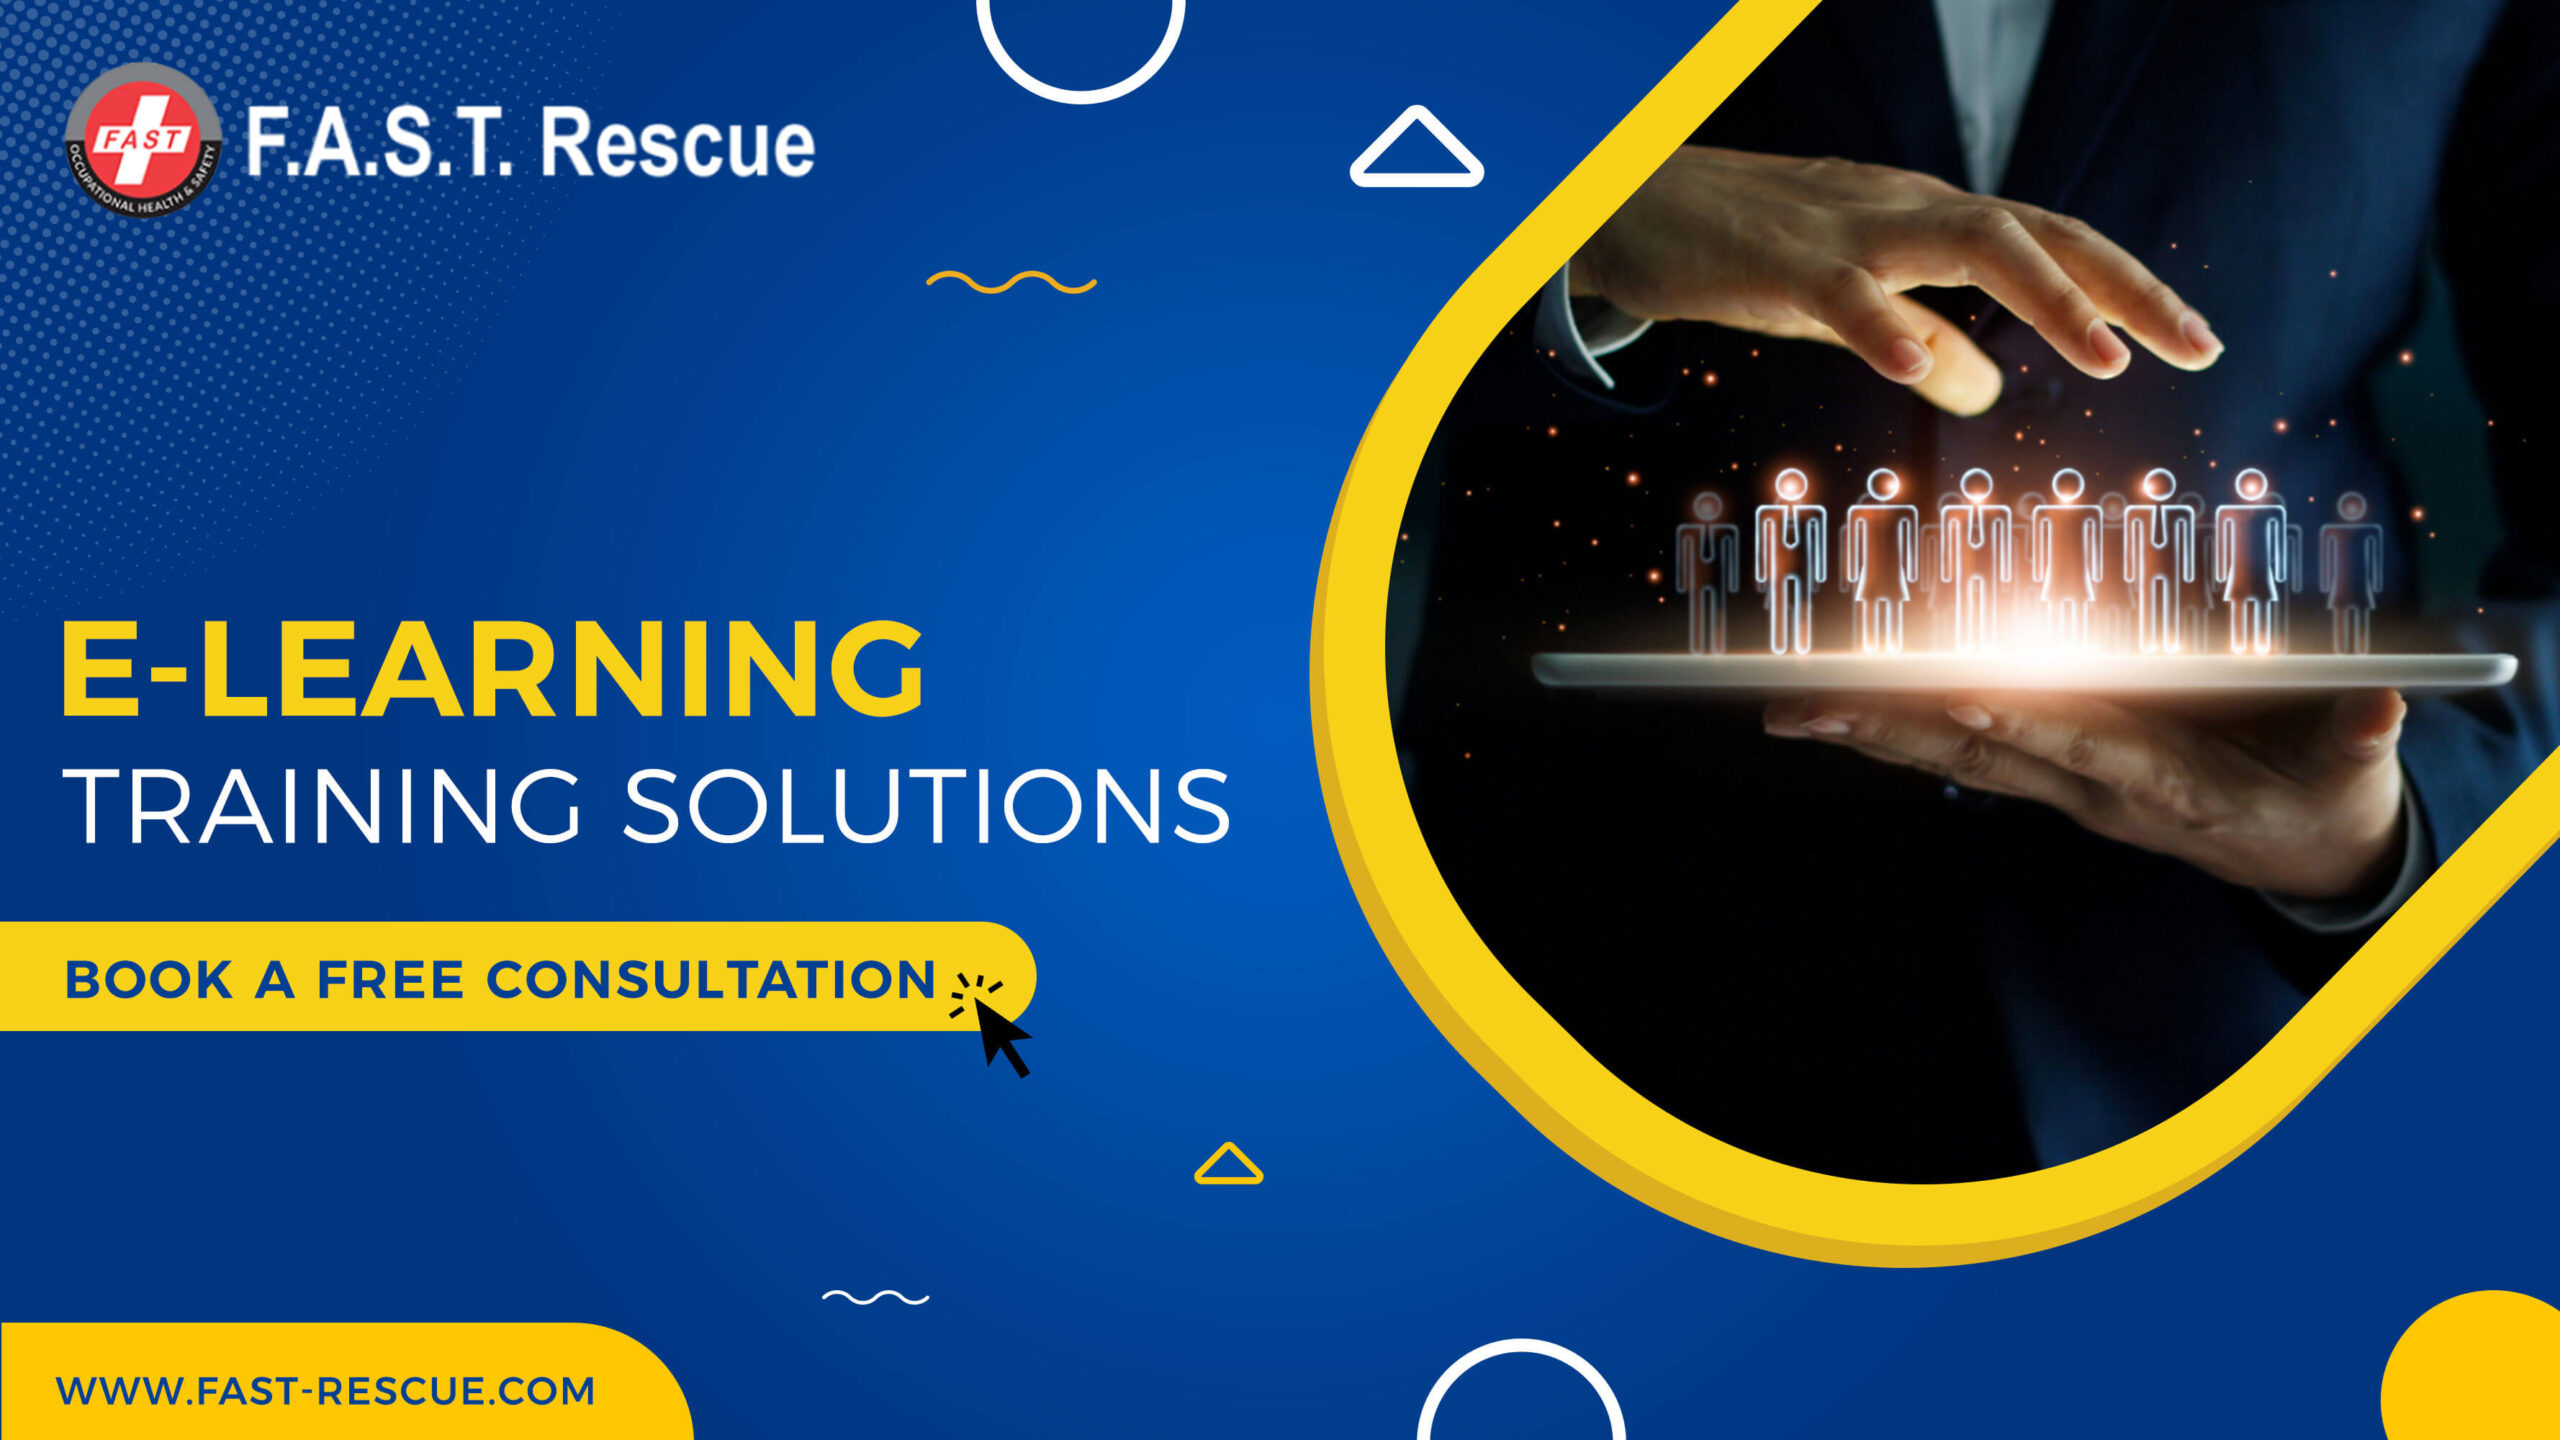 eLearning Training Solutions In Canada - F.A.S.T. Rescue Inc.